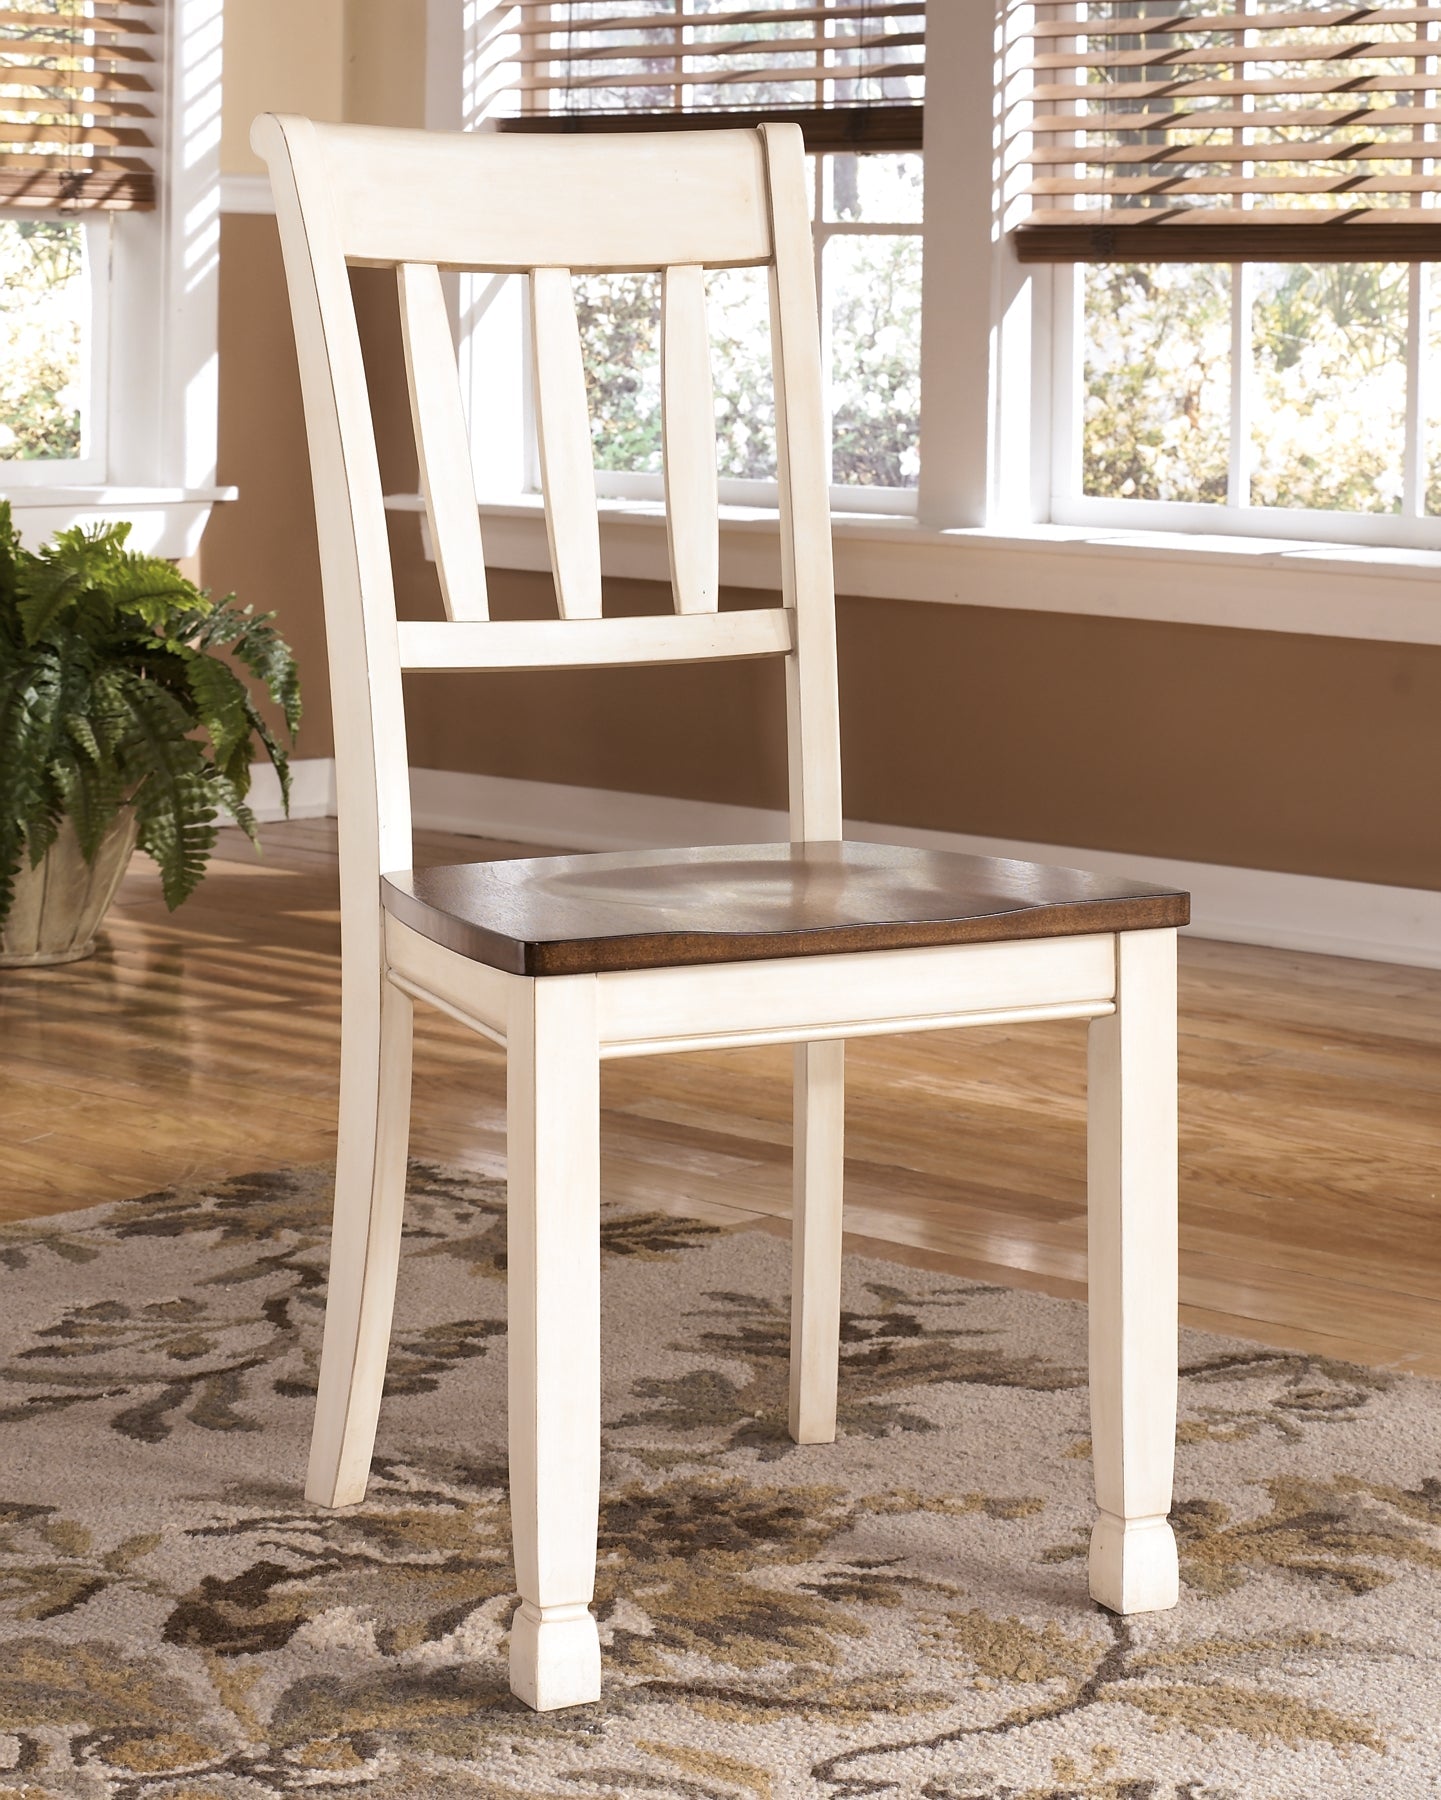 Whitesburg Dining Table and 6 Chairs at Walker Mattress and Furniture Locations in Cedar Park and Belton TX.